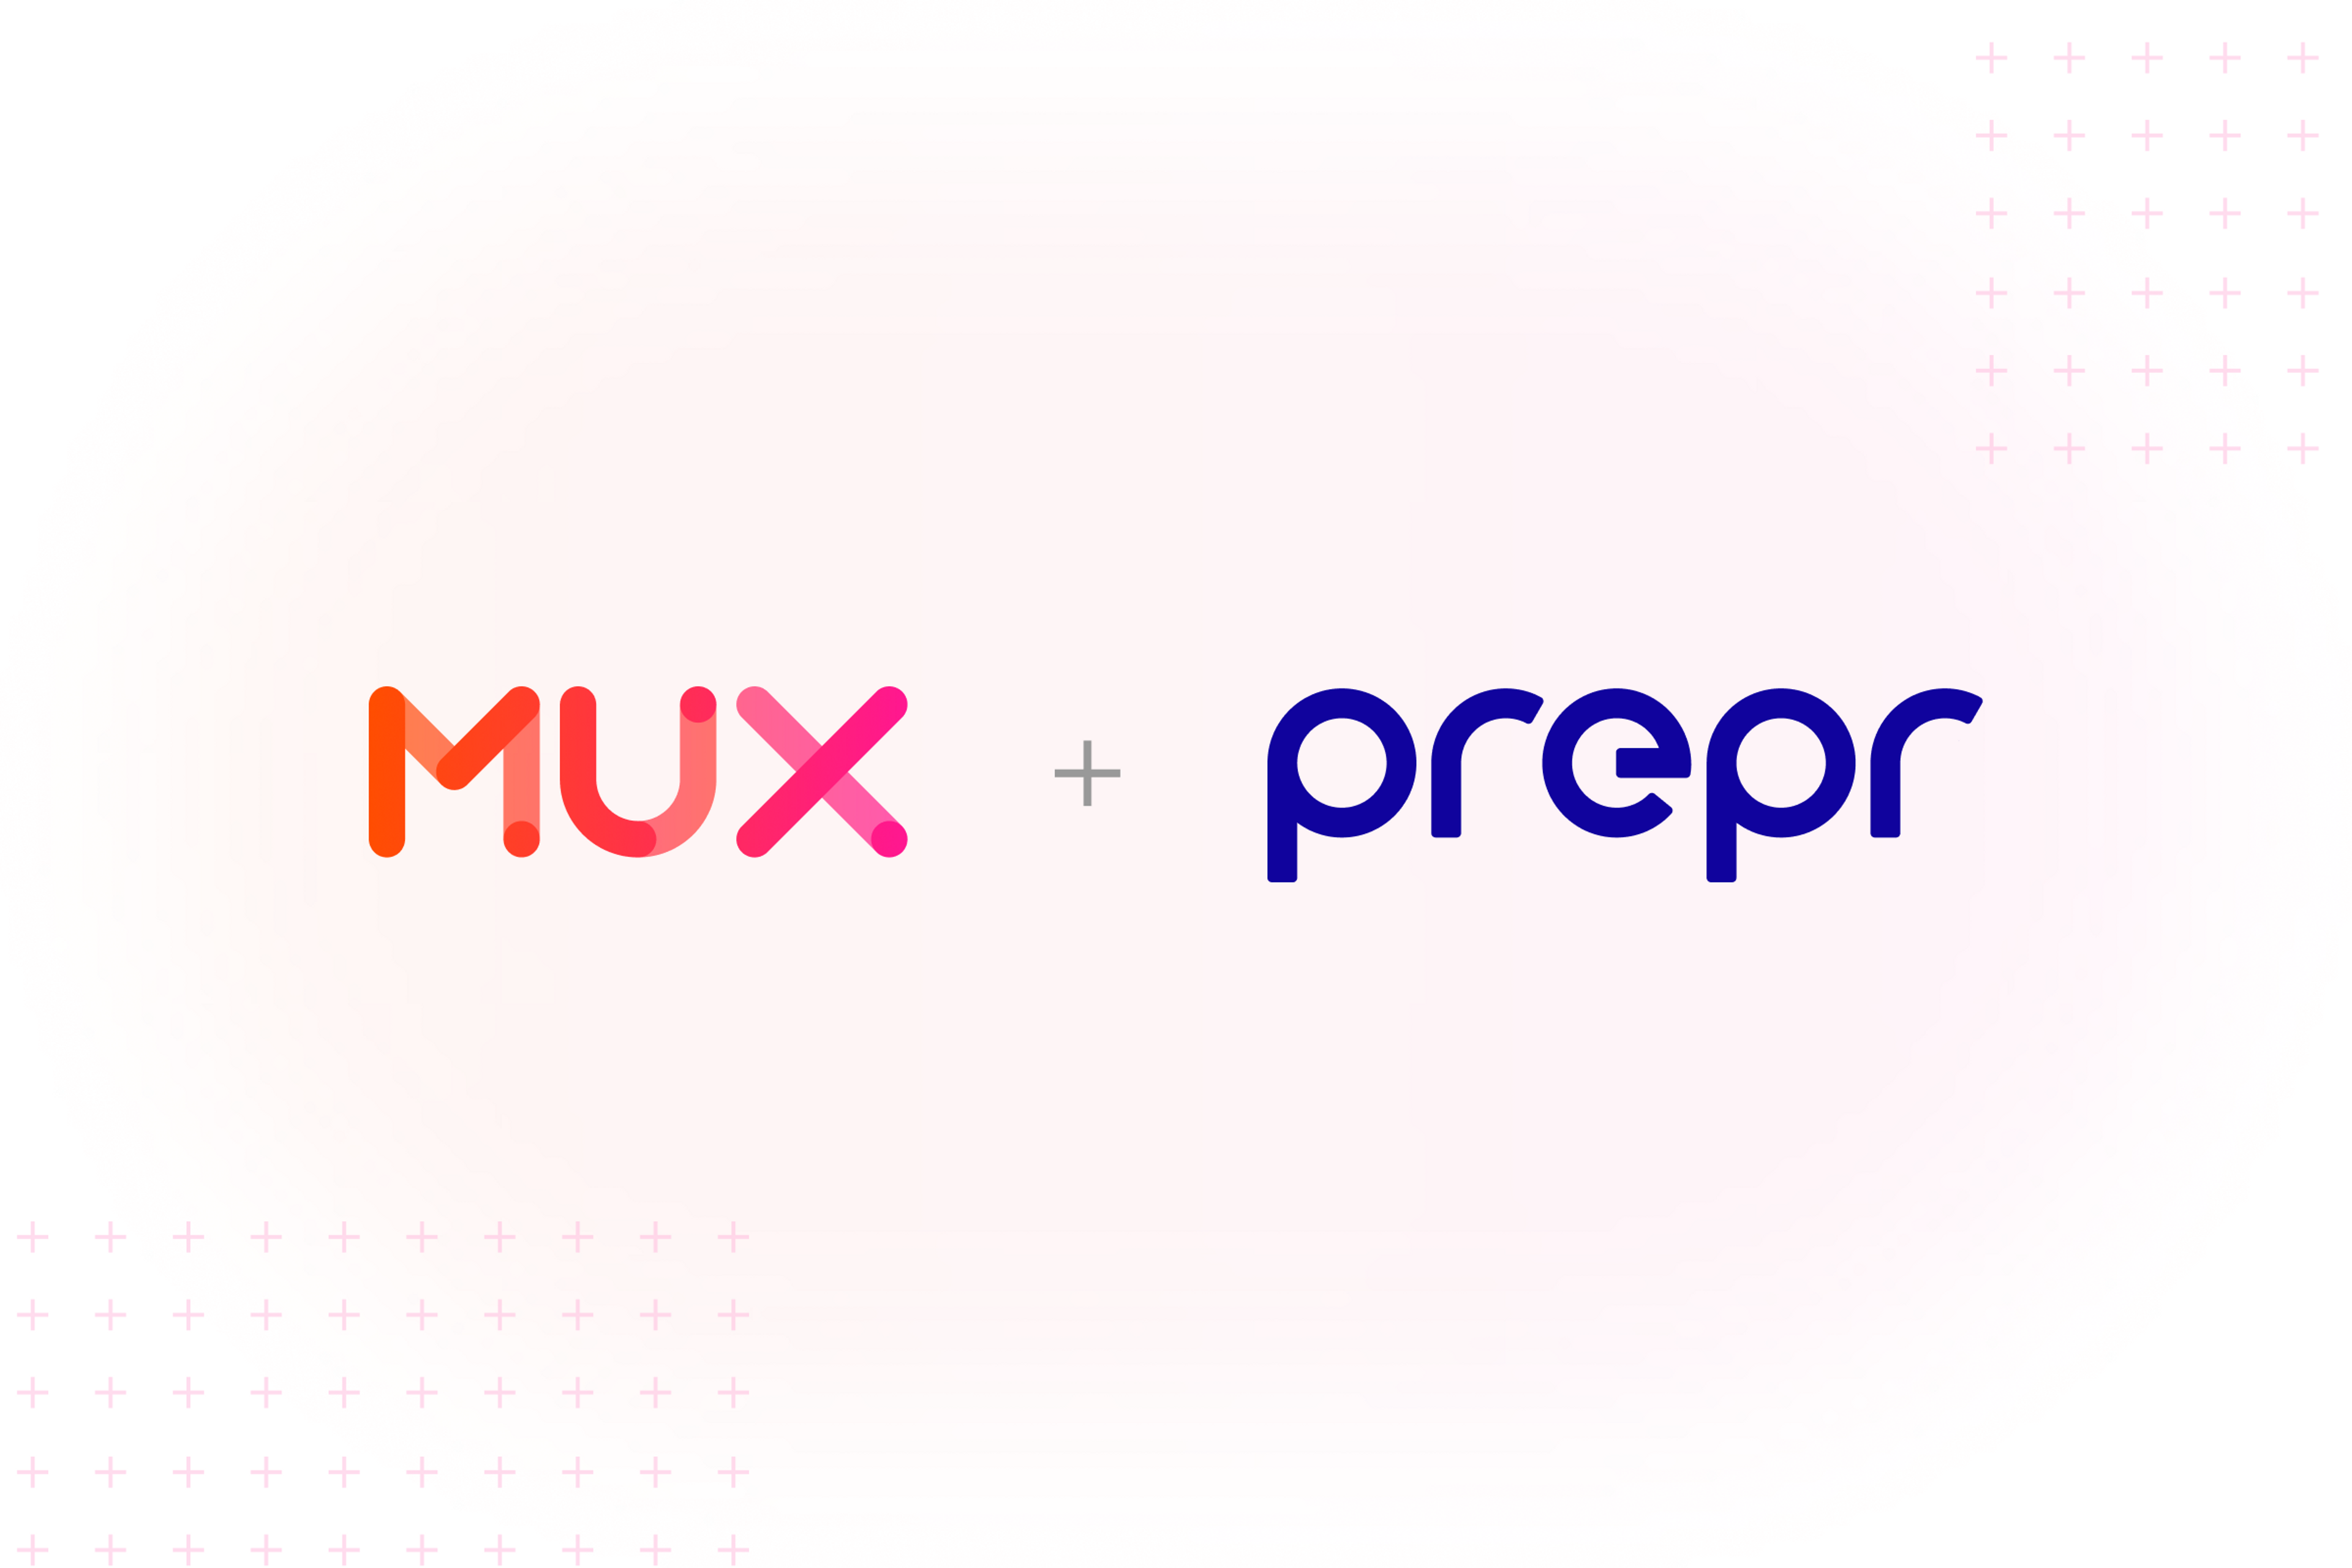 Program, schedule, and stream high-quality live video with Prepr CMS; powered by Mux